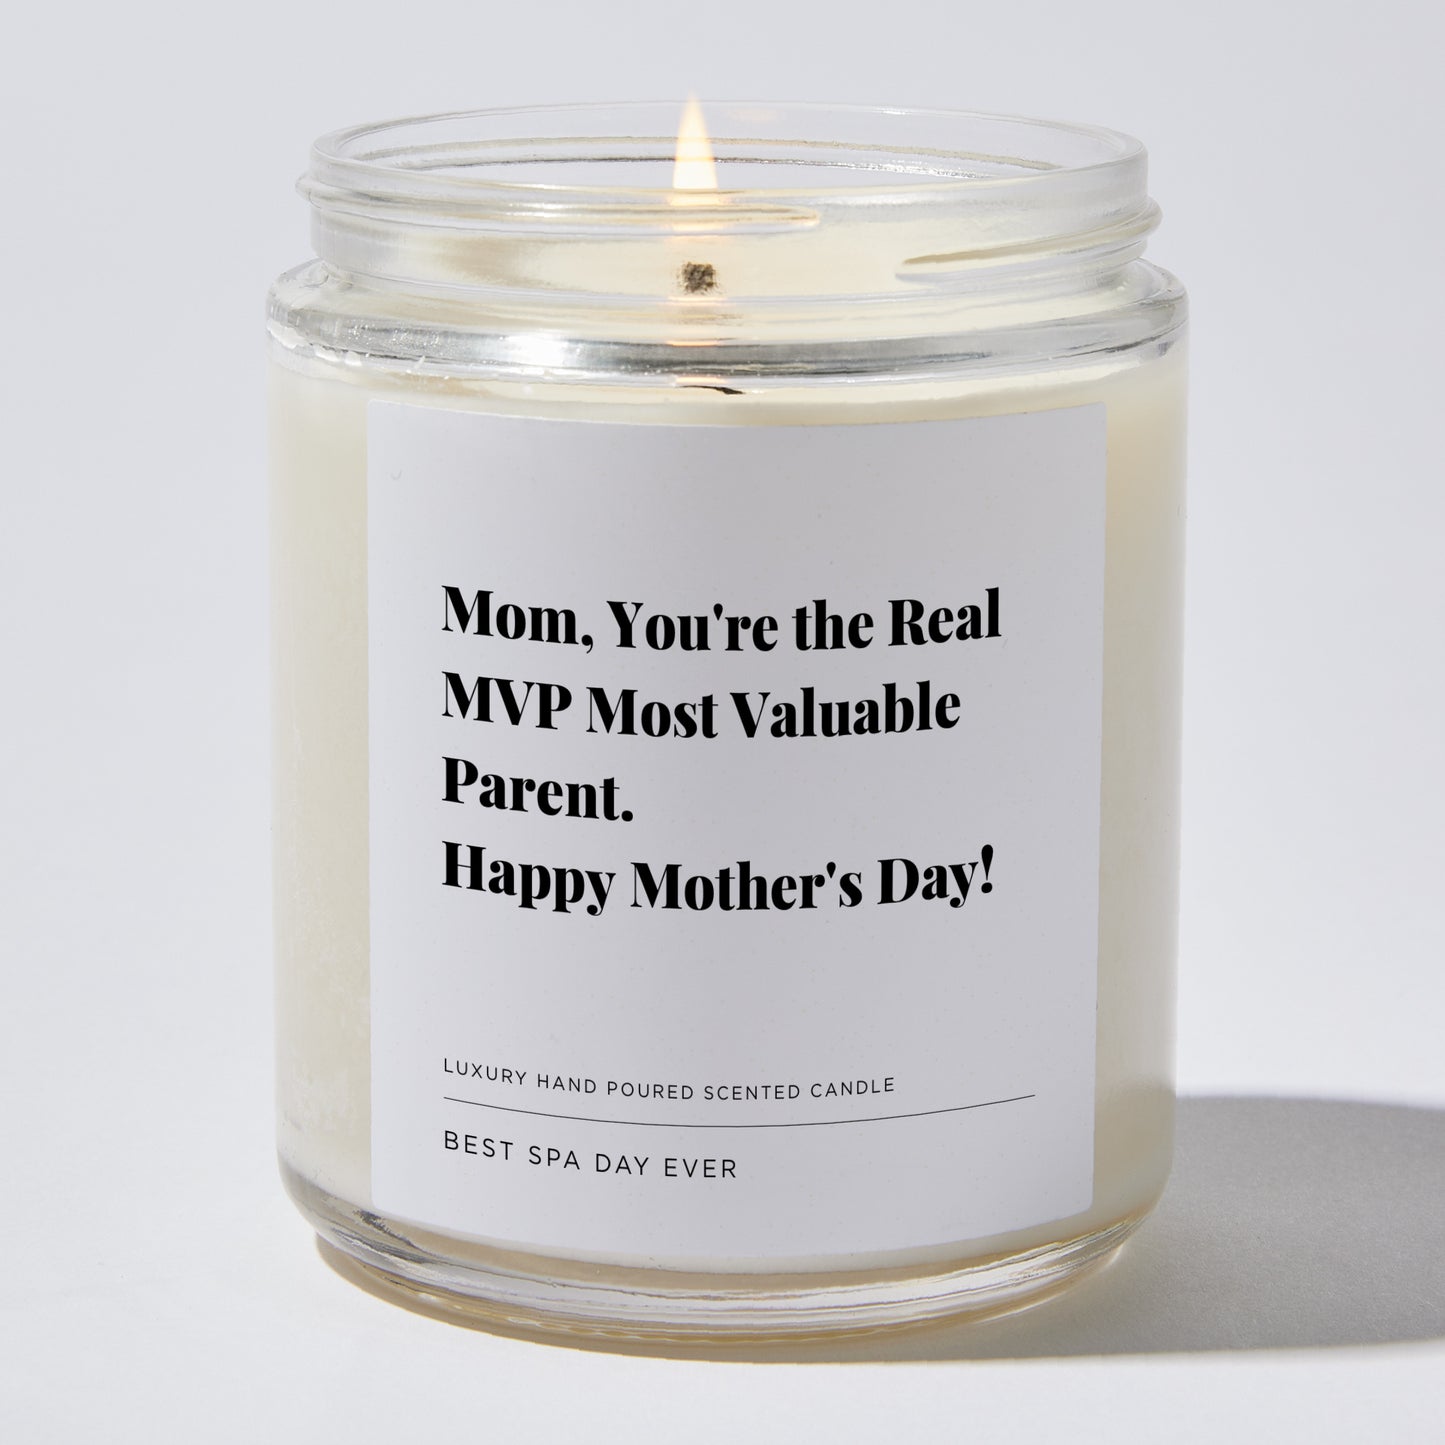 Gift for Mom - Mom, you're the real MVP... Most Valuable Parent. Happy Mother's Day! - Candle